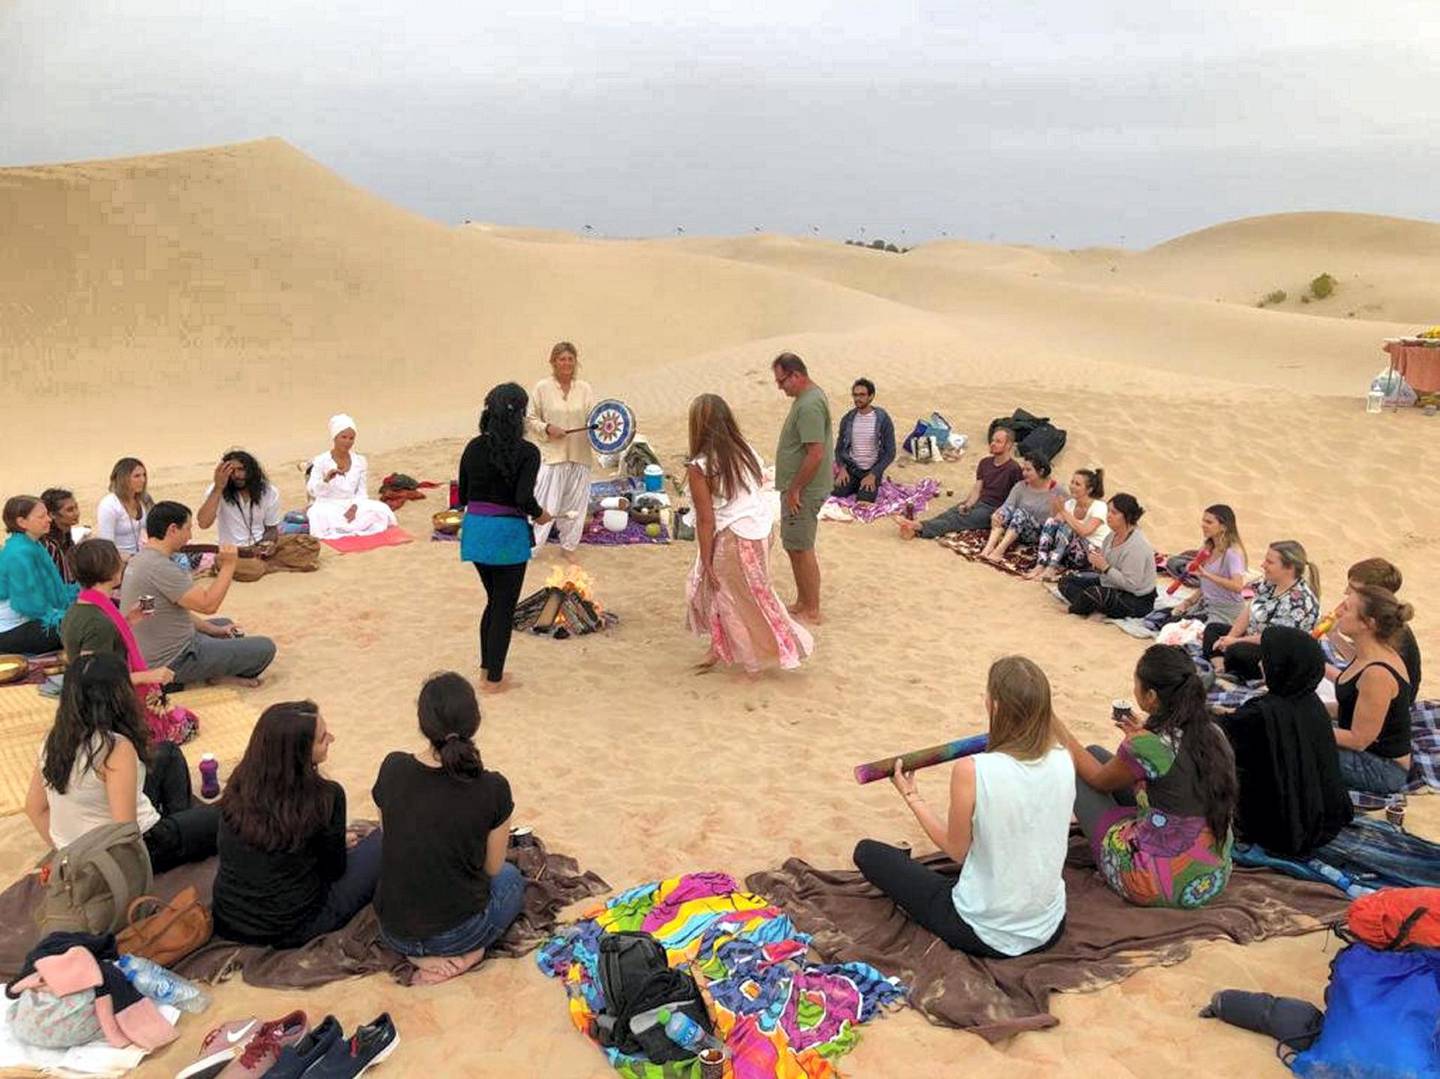 A cacao ceremony led by Lara Skadsen, a vibrational energy practitioner from Abu Dhabi, during which liquid cacao is consumed while participants share stories. Courtesy Lara Skadsen 